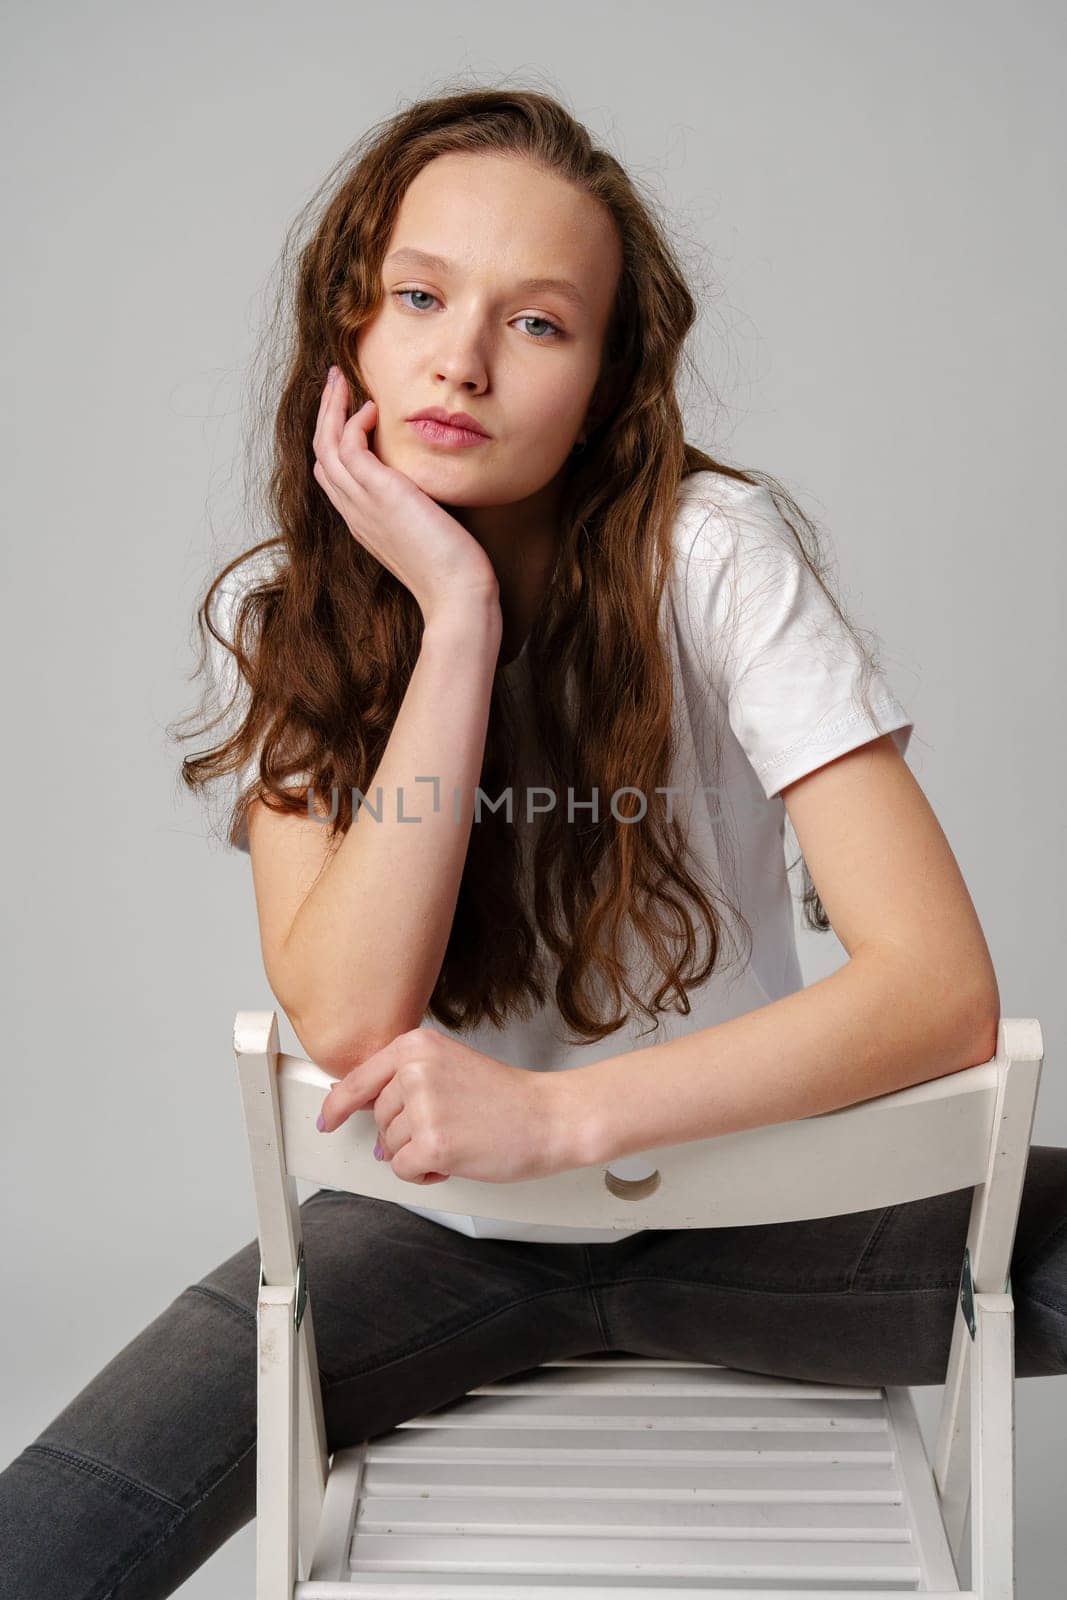 Curly girl model posing on a chair against gray background in studio